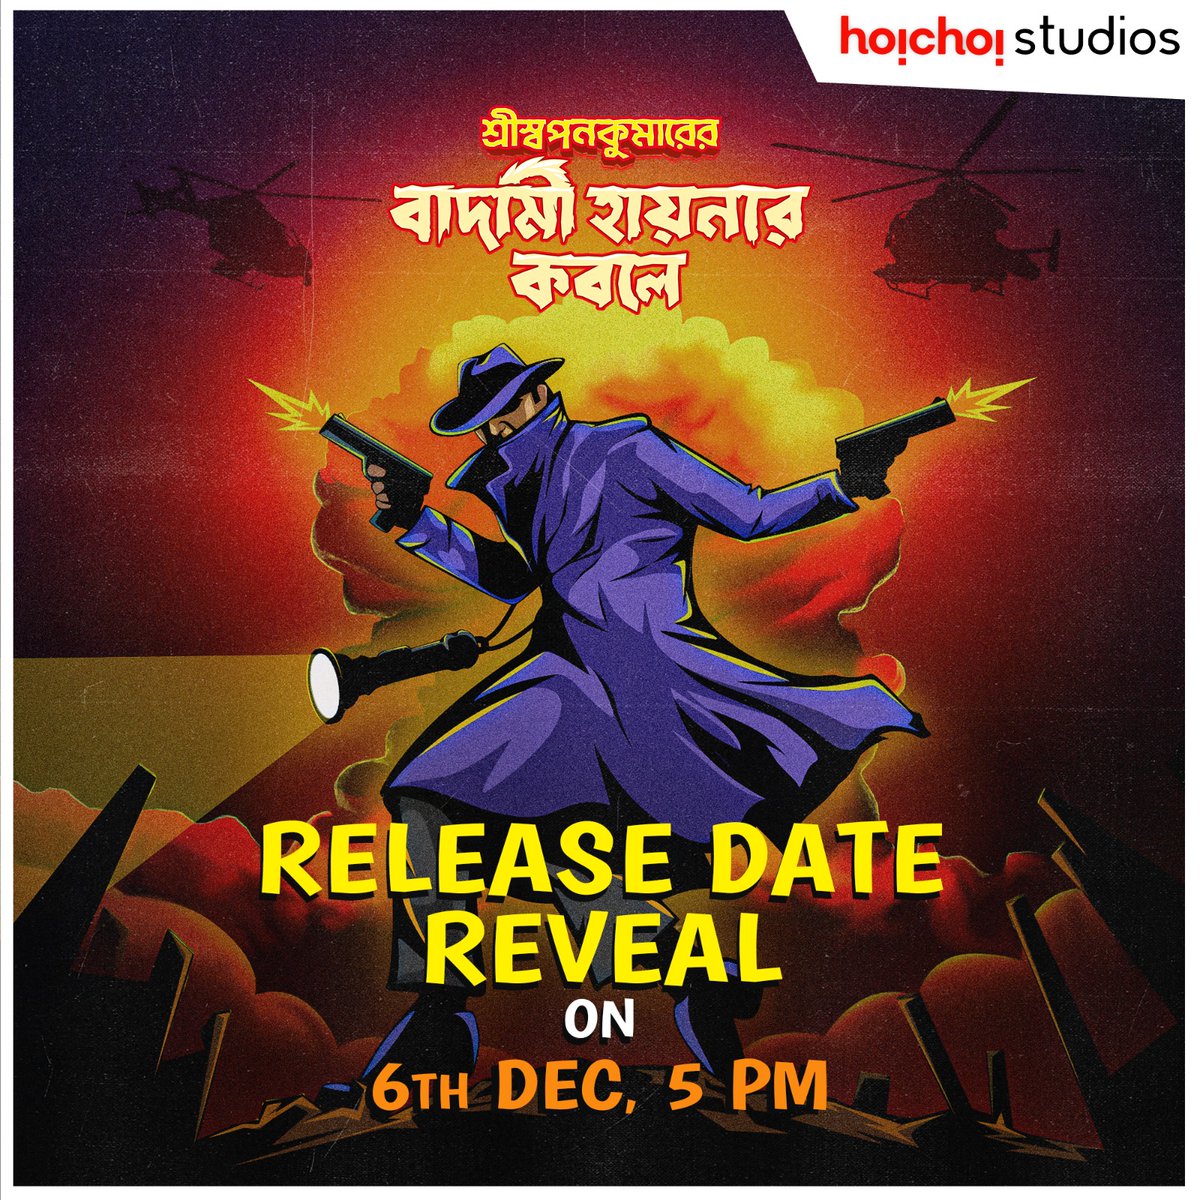 A big announcement is coming your way tomorrow! How excited are you? #ShriSwapankumarerBadamiHyenarKobole, film by #DebaloyBhattacharya is coming soon in theatres near you. @itsmeabir #hoichoistudios @hoichoitv #ShriSwapanKumar #BadamiHyenarKobole #hoichoiEbarCinemaHallE